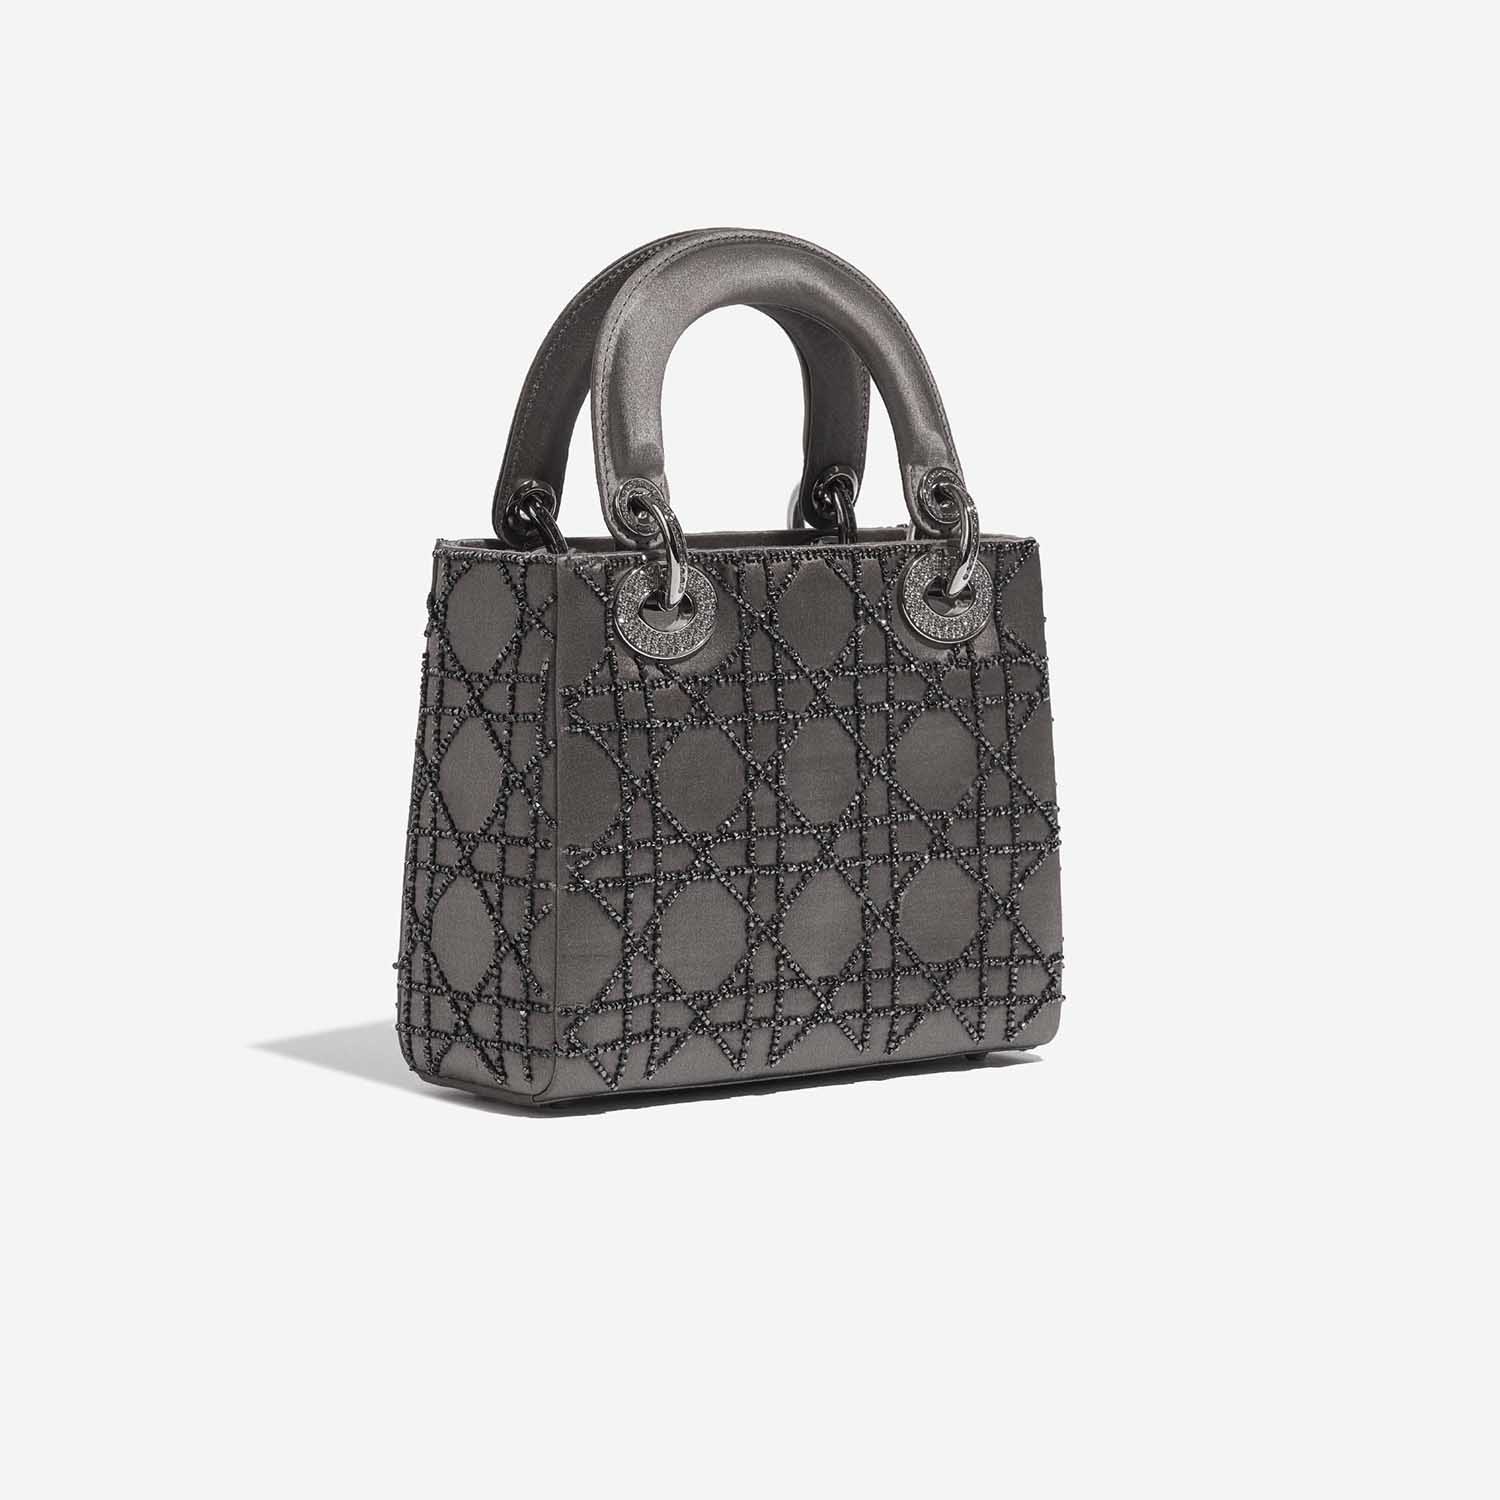 Pre-owned Dior bag Lady Mini Satin Grey Grey Side Front | Sell your designer bag on Saclab.com